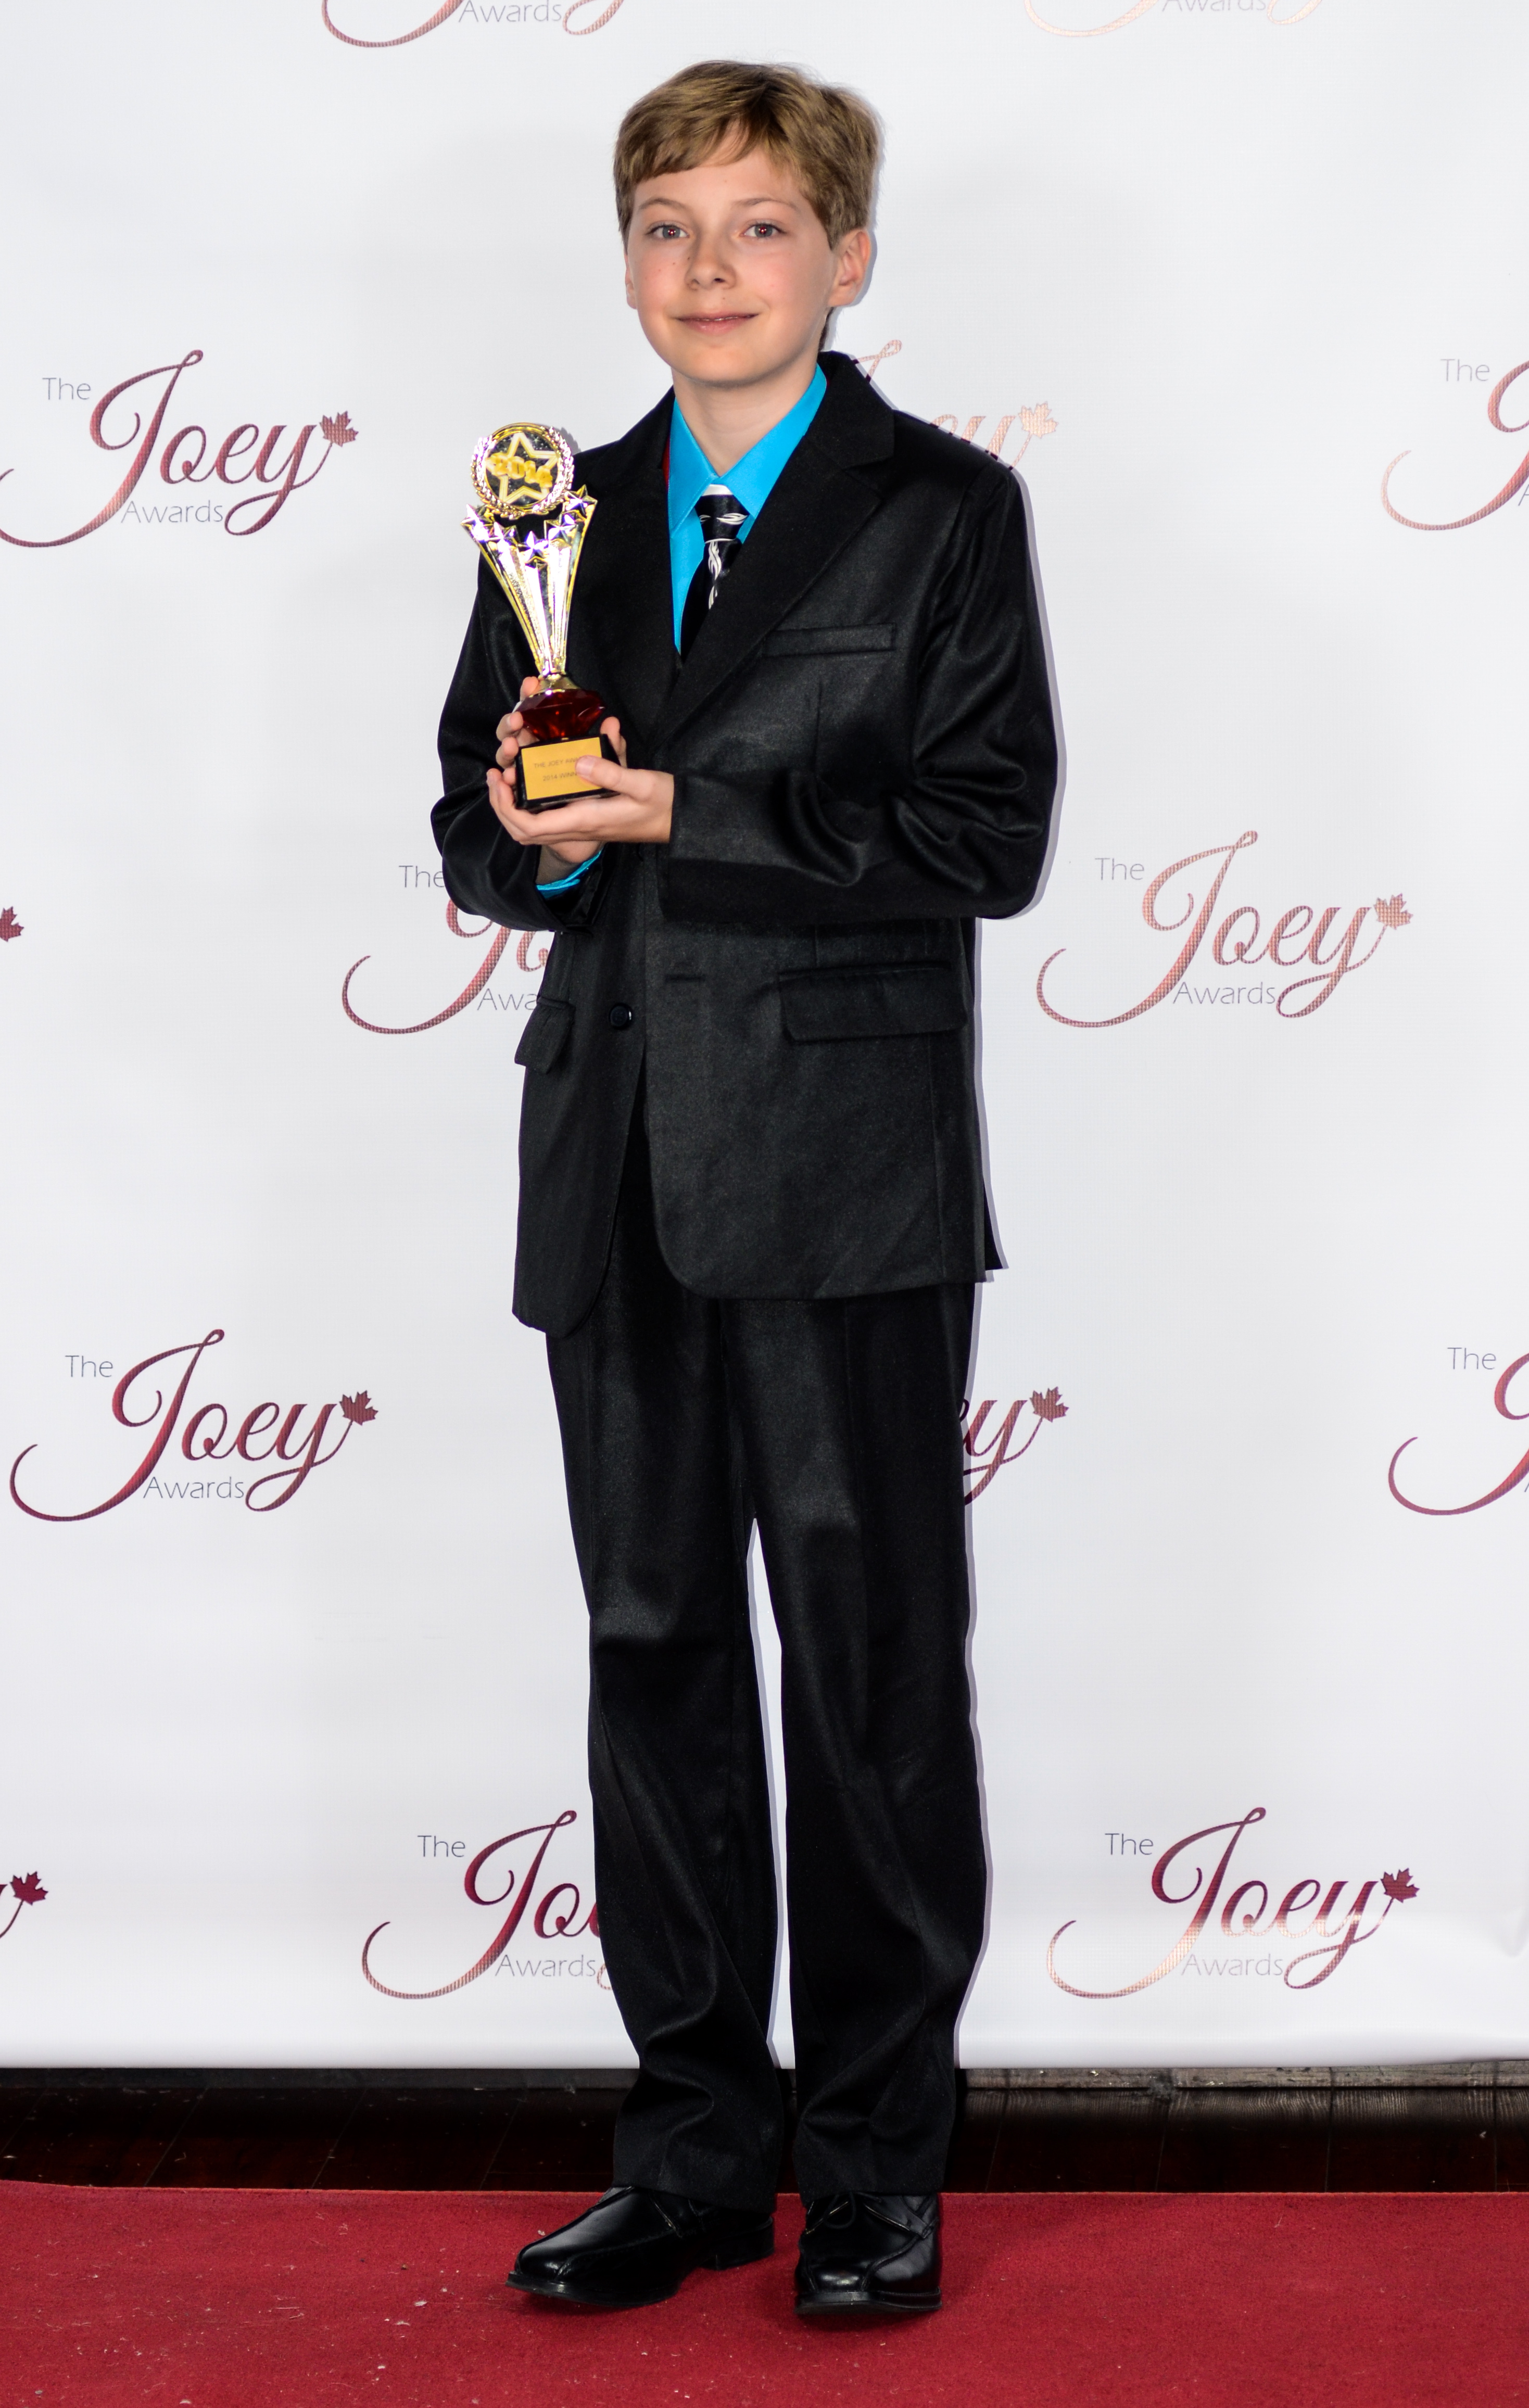 Alex with his 2014 Joey Award for his role as the voice of Zuma in PAW Patrol